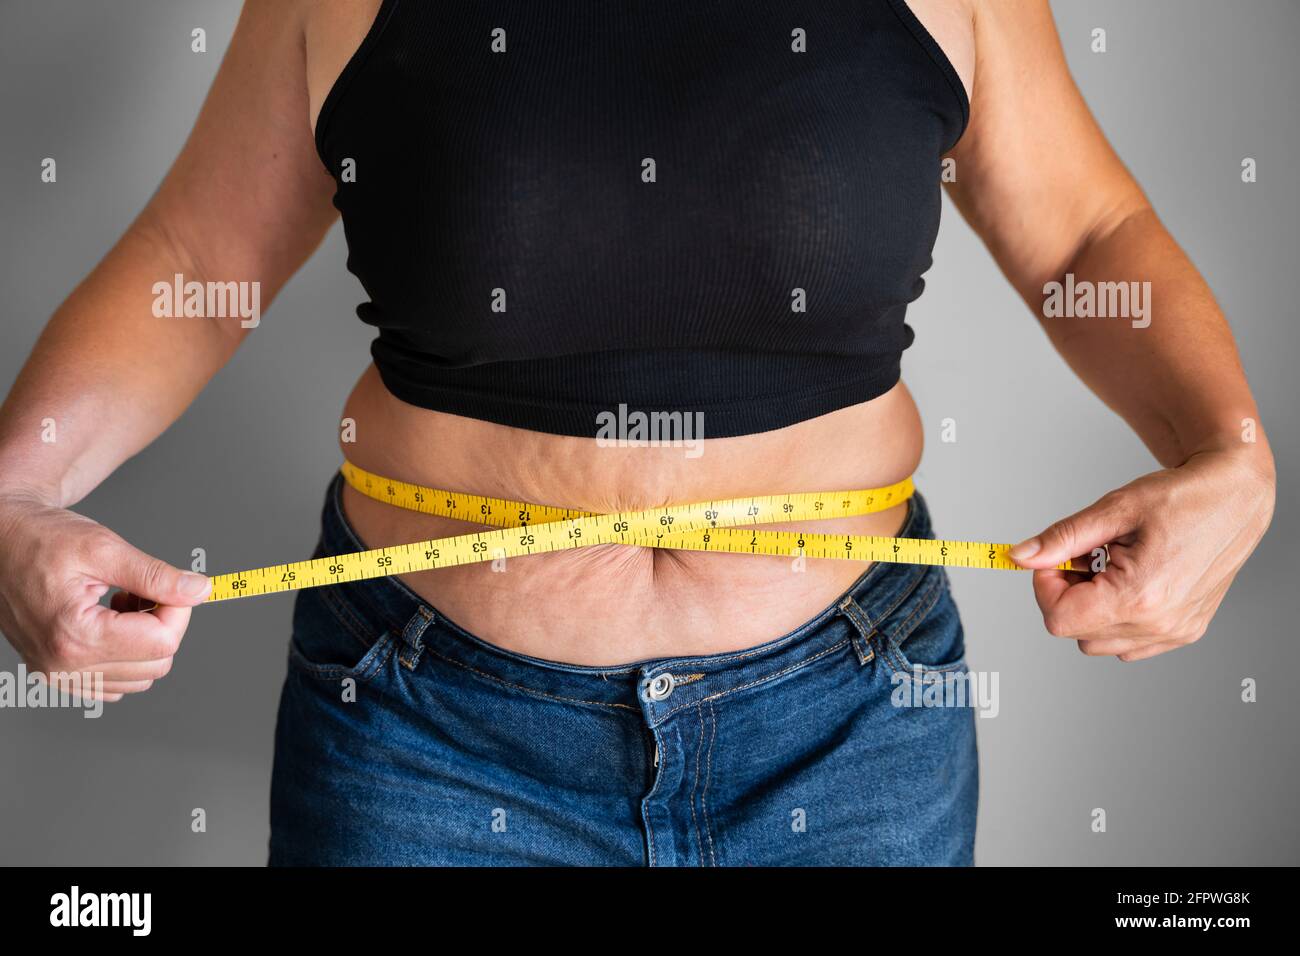 Caucasian Woman With Belly Fat Using Tape Measure Closeup Stock Photo